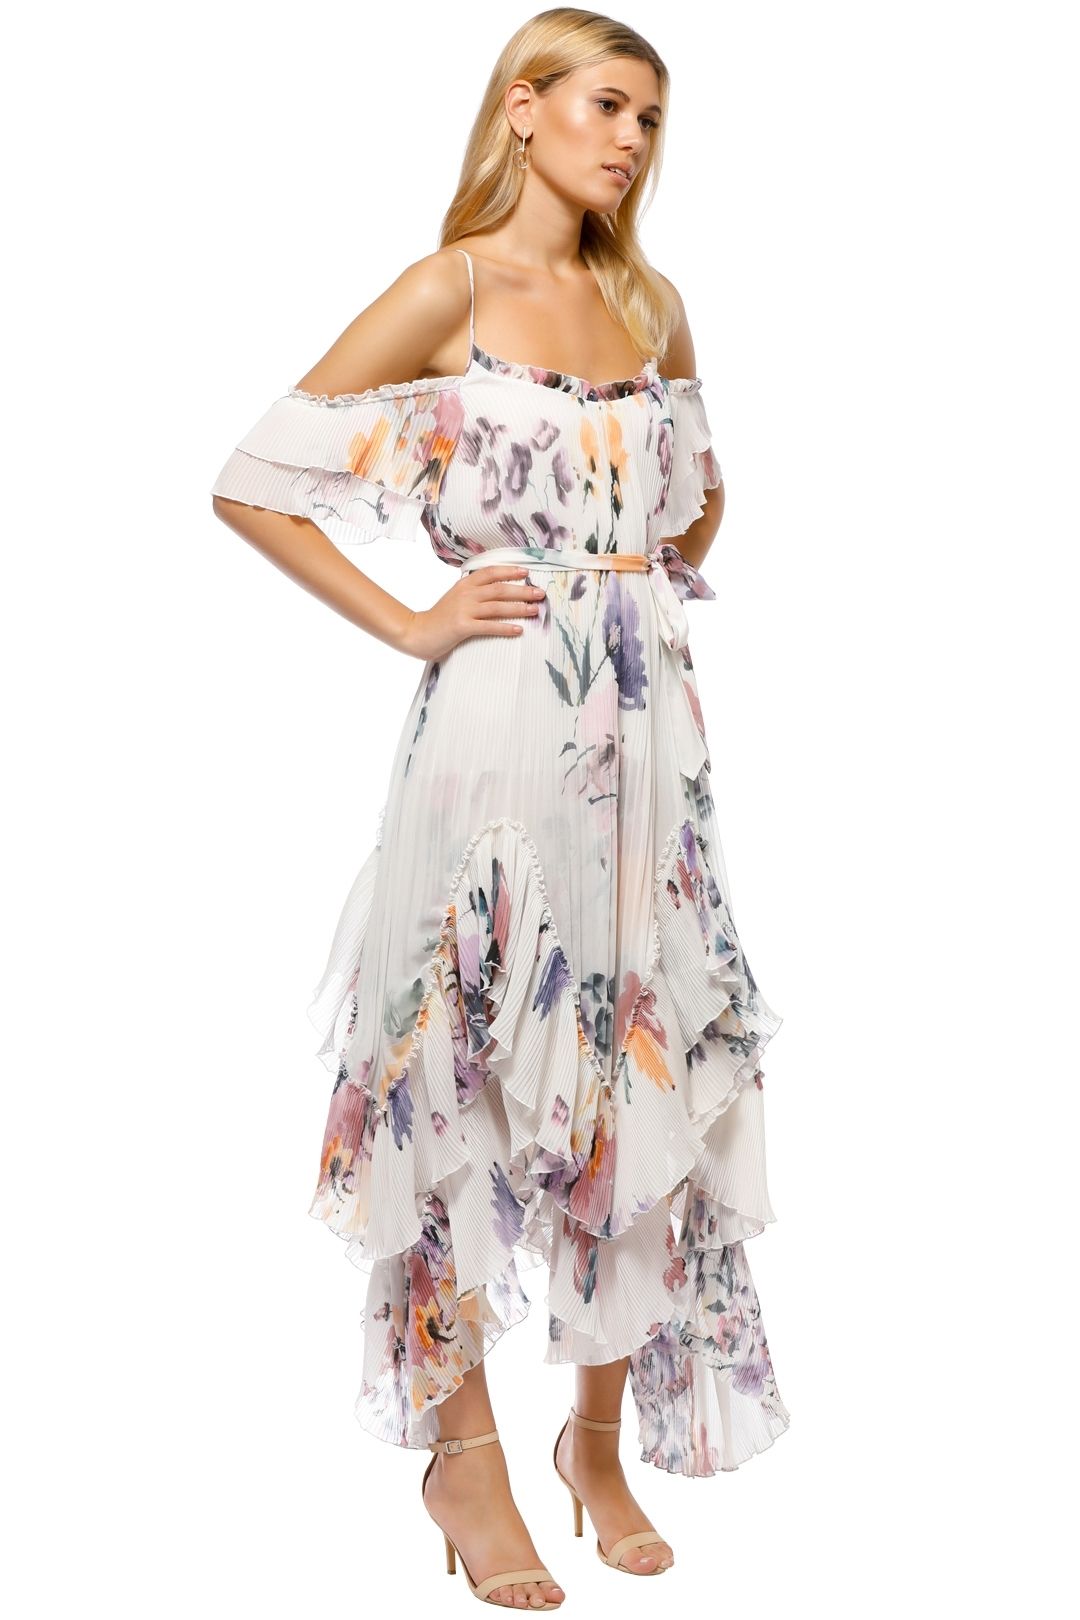 We Are Kindred - Catarina Pleat Maxi Dress - White Floral - Side